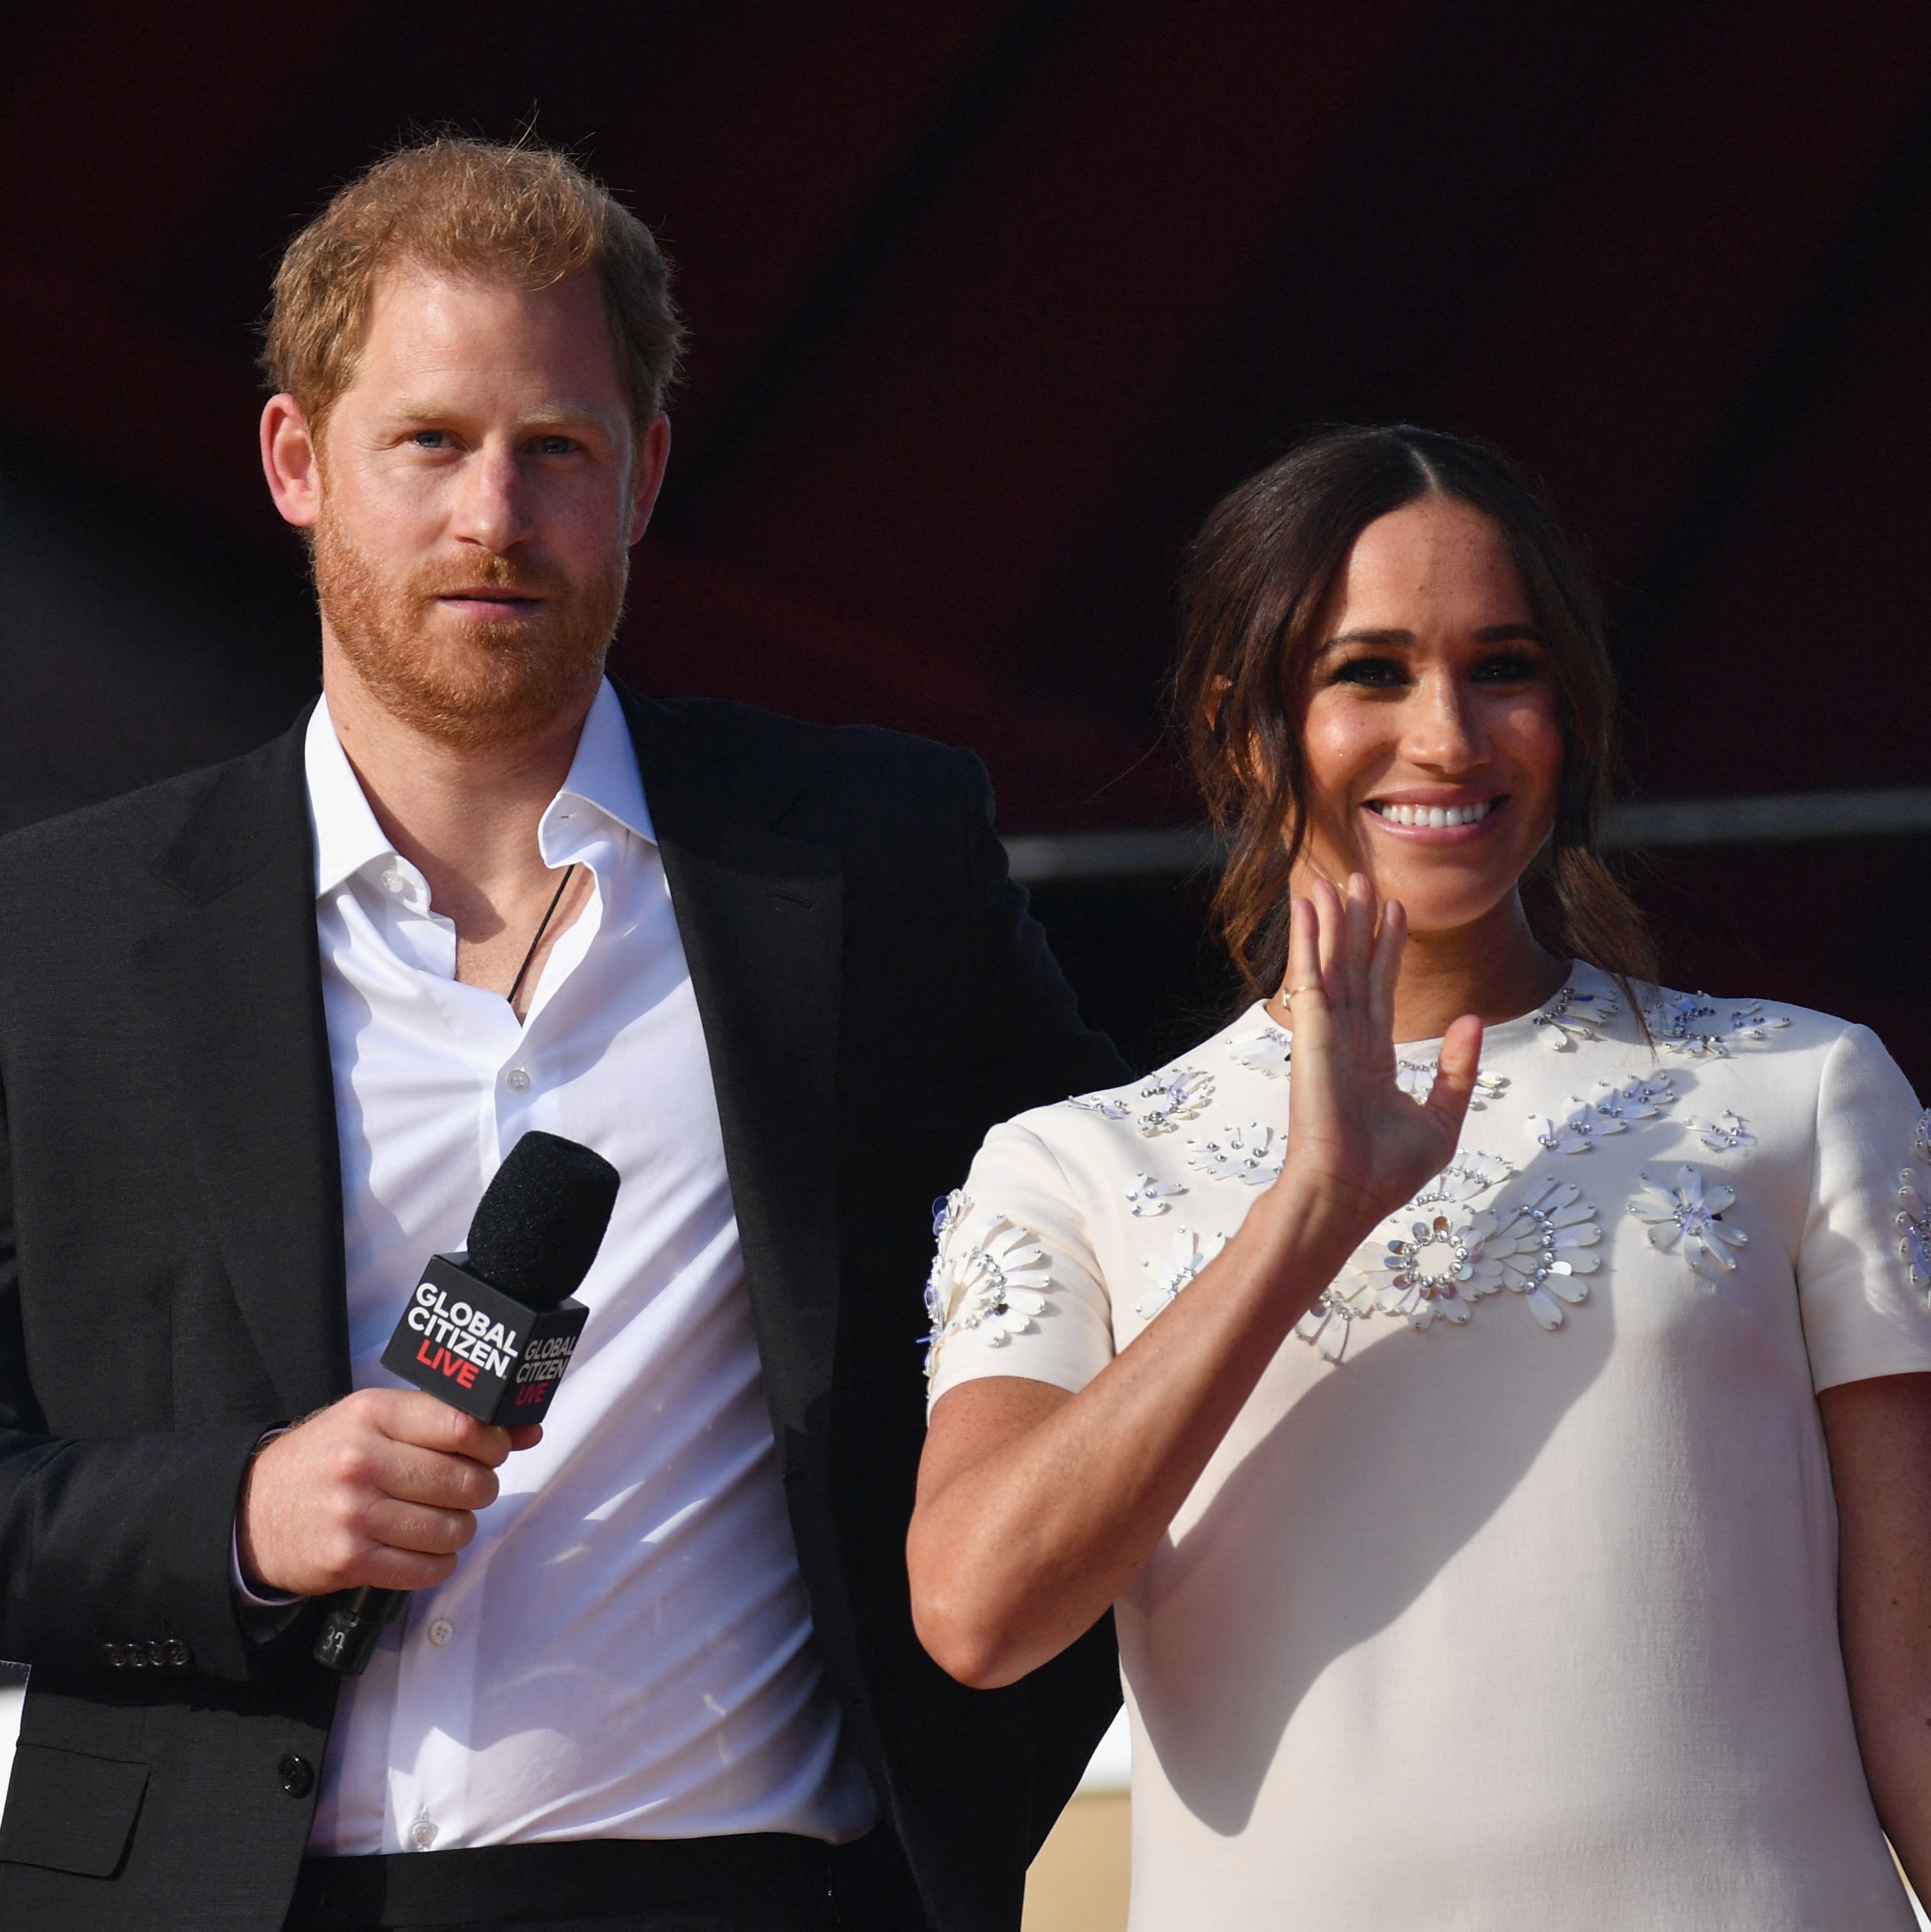 The Duke of Sussex is contesting the ban on him paying for his own police security.